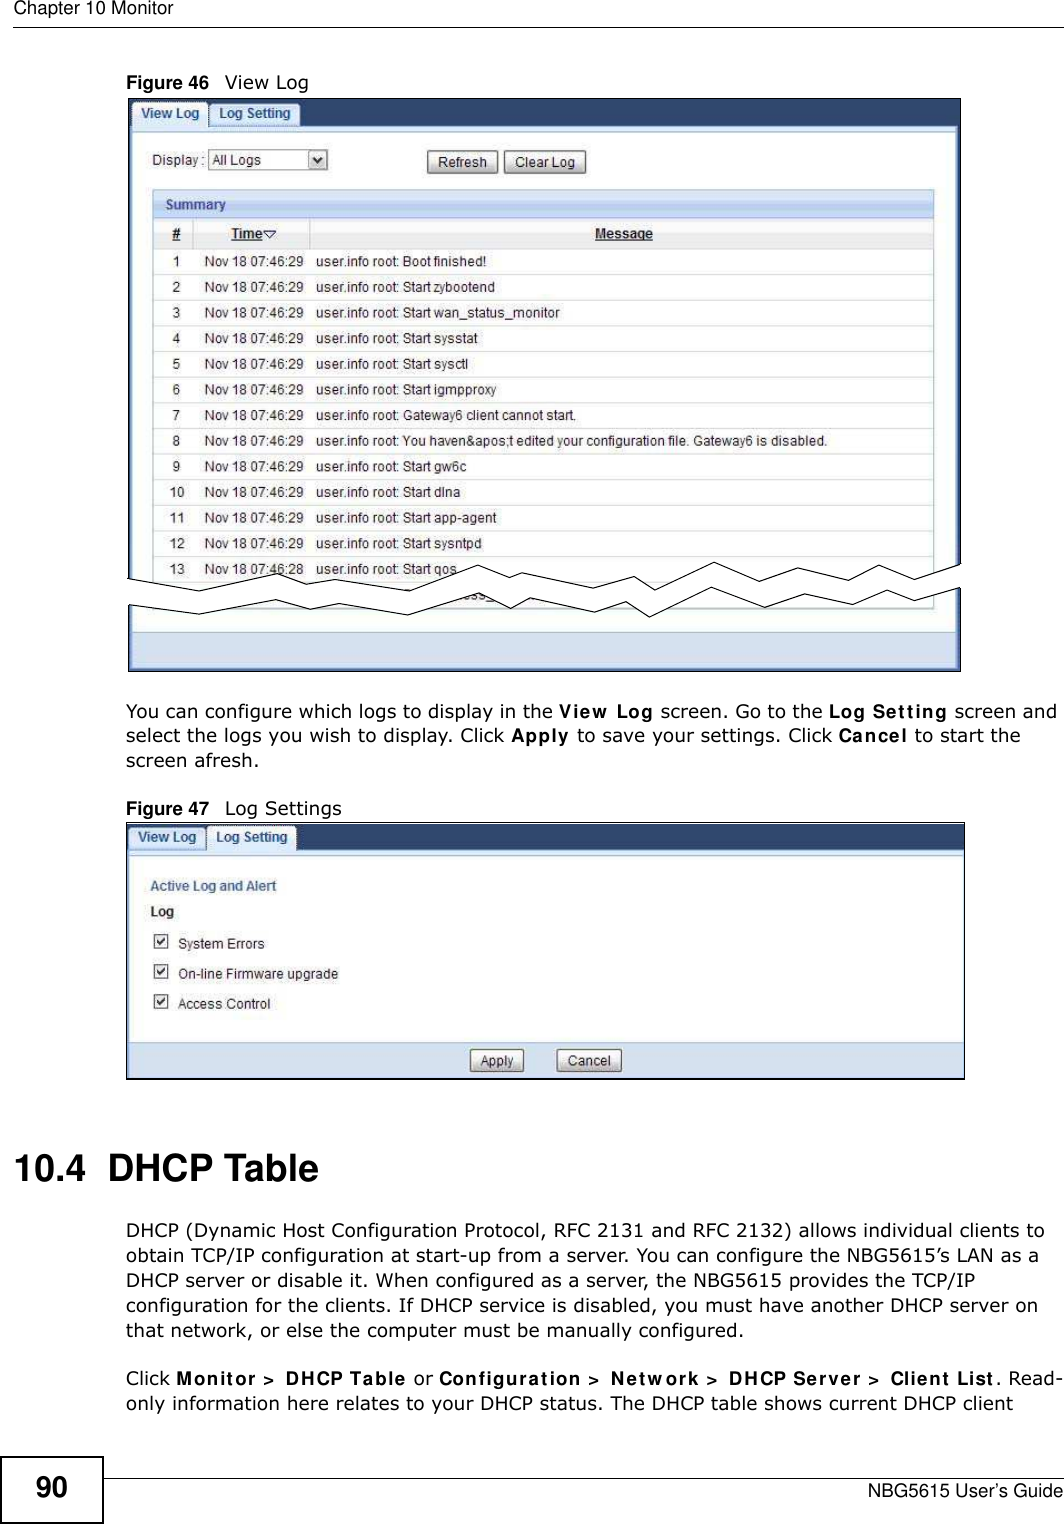 Chapter 10 MonitorNBG5615 User’s Guide90Figure 46   View LogYou can configure which logs to display in the View  Log screen. Go to the Log Setting screen and select the logs you wish to display. Click Apply to save your settings. Click Cancel to start the screen afresh.Figure 47   Log Settings10.4  DHCP Table    DHCP (Dynamic Host Configuration Protocol, RFC 2131 and RFC 2132) allows individual clients to obtain TCP/IP configuration at start-up from a server. You can configure the NBG5615’s LAN as a DHCP server or disable it. When configured as a server, the NBG5615 provides the TCP/IP configuration for the clients. If DHCP service is disabled, you must have another DHCP server on that network, or else the computer must be manually configured.Click Monitor &gt;  DHCP Table or Configuration &gt;  Netw ork &gt;  DHCP Server &gt;  Client List. Read-only information here relates to your DHCP status. The DHCP table shows current DHCP client 